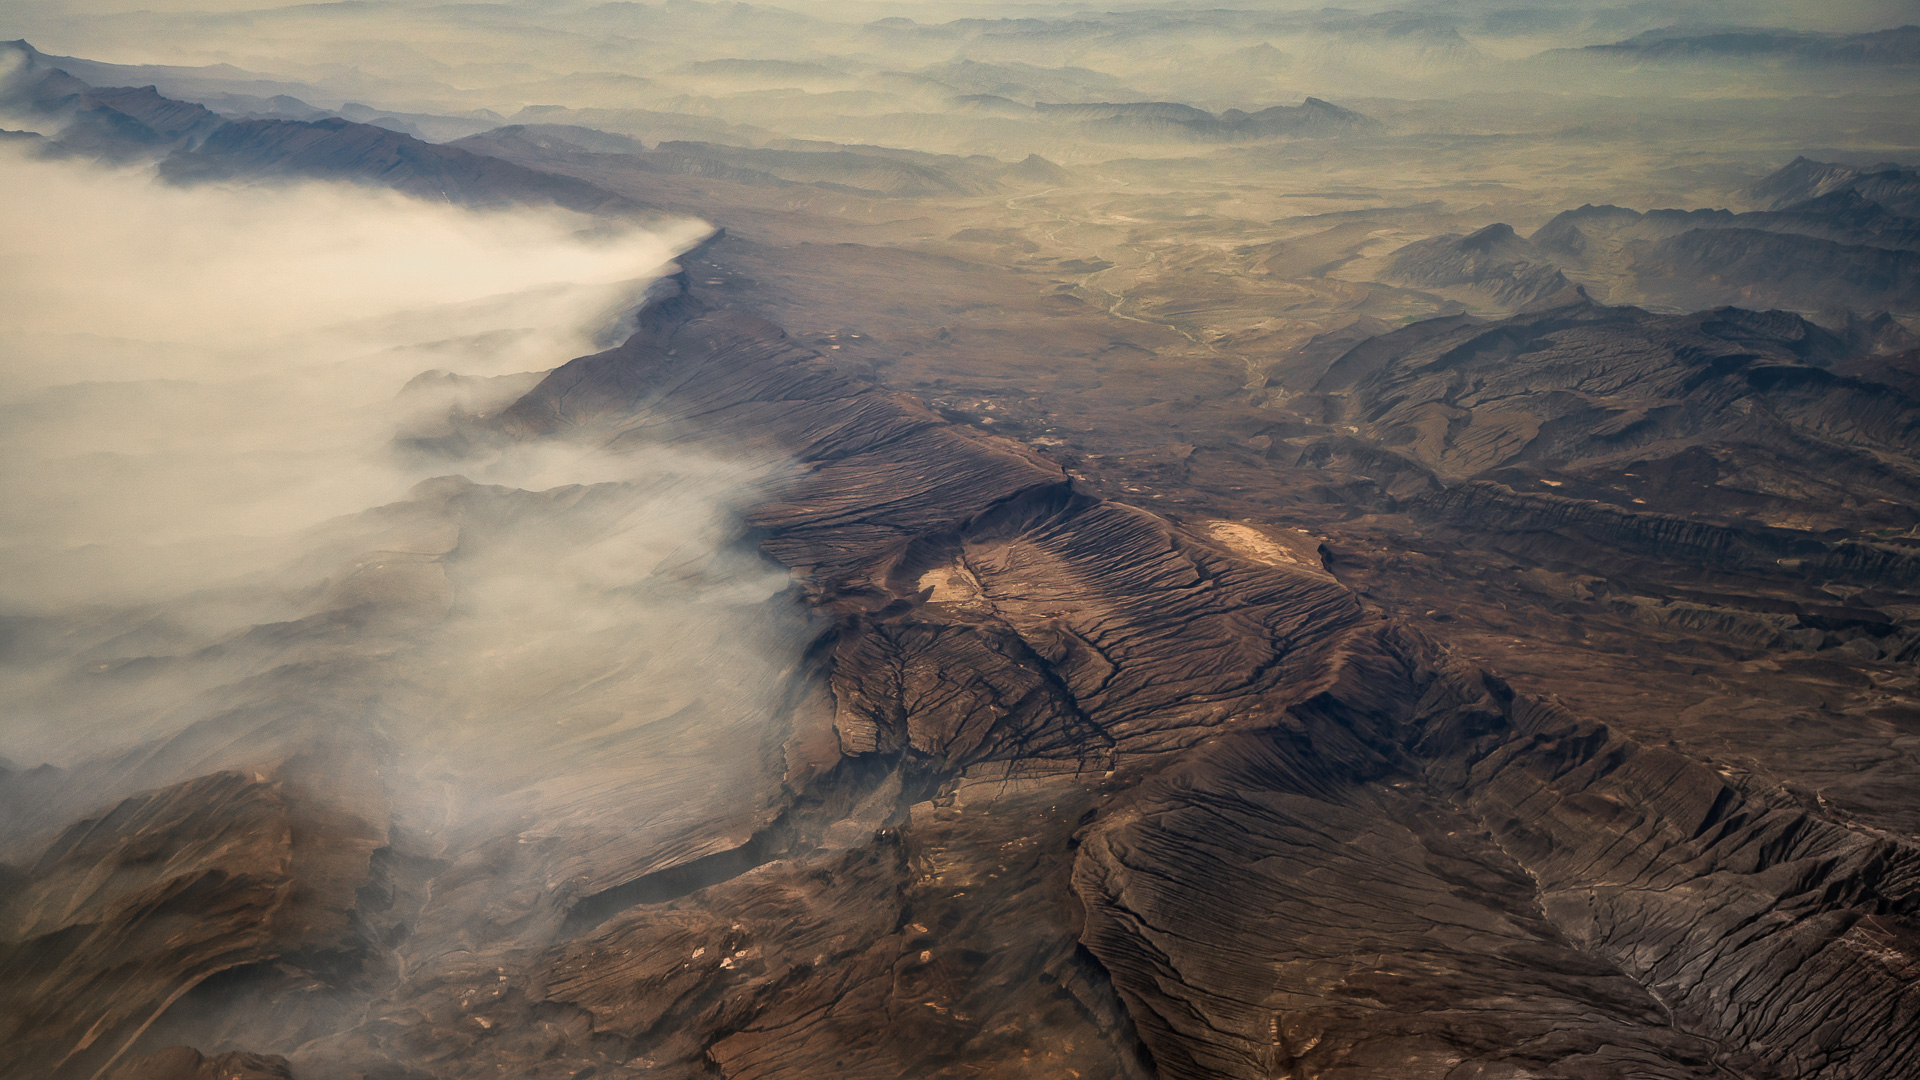 Pakistan, aerial image, orographic clouds, desert